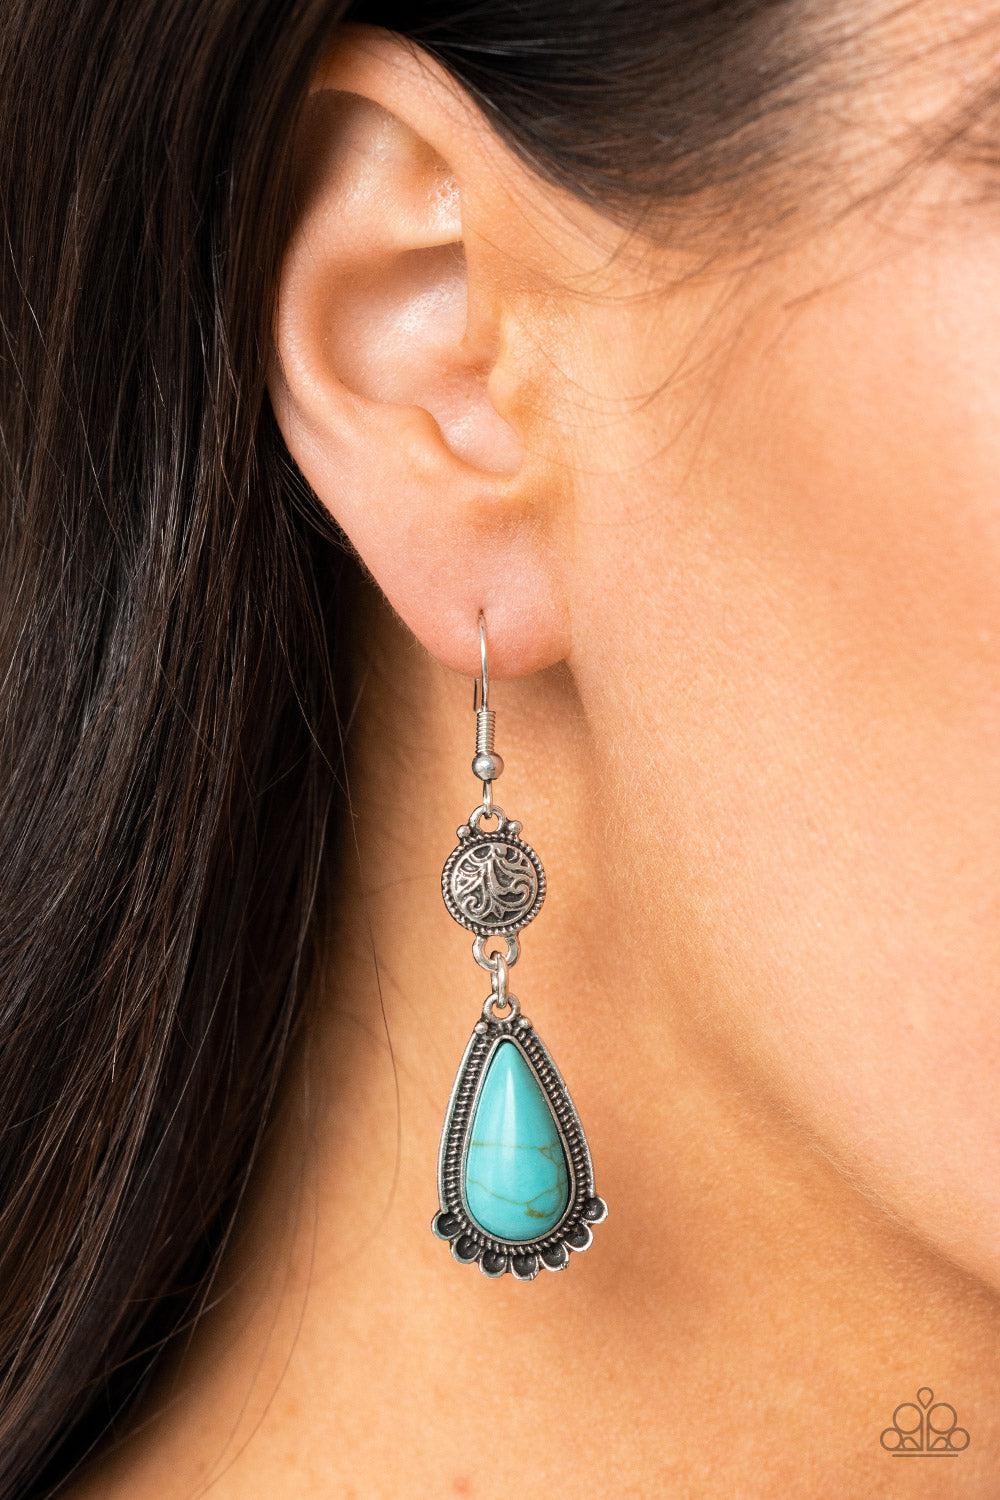 Montana Mountains Turquoise Blue Stone Earrings - Paparazzi Accessories-on model - CarasShop.com - $5 Jewelry by Cara Jewels